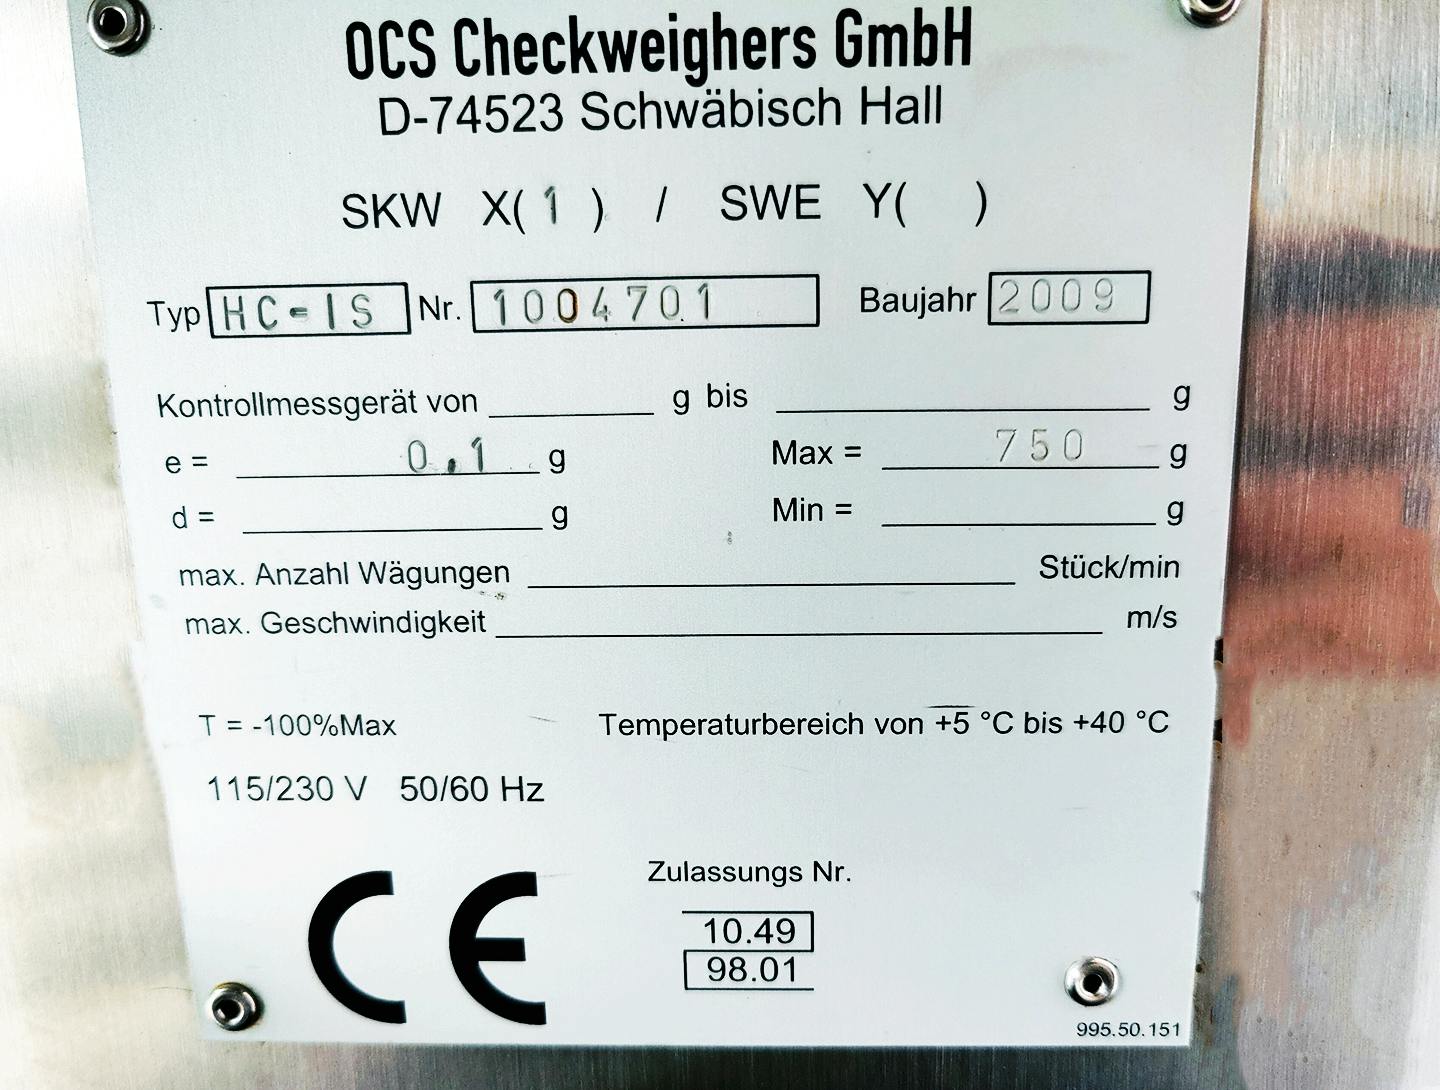 OCS Checkweighers HC-IS - Transport divers - image 10